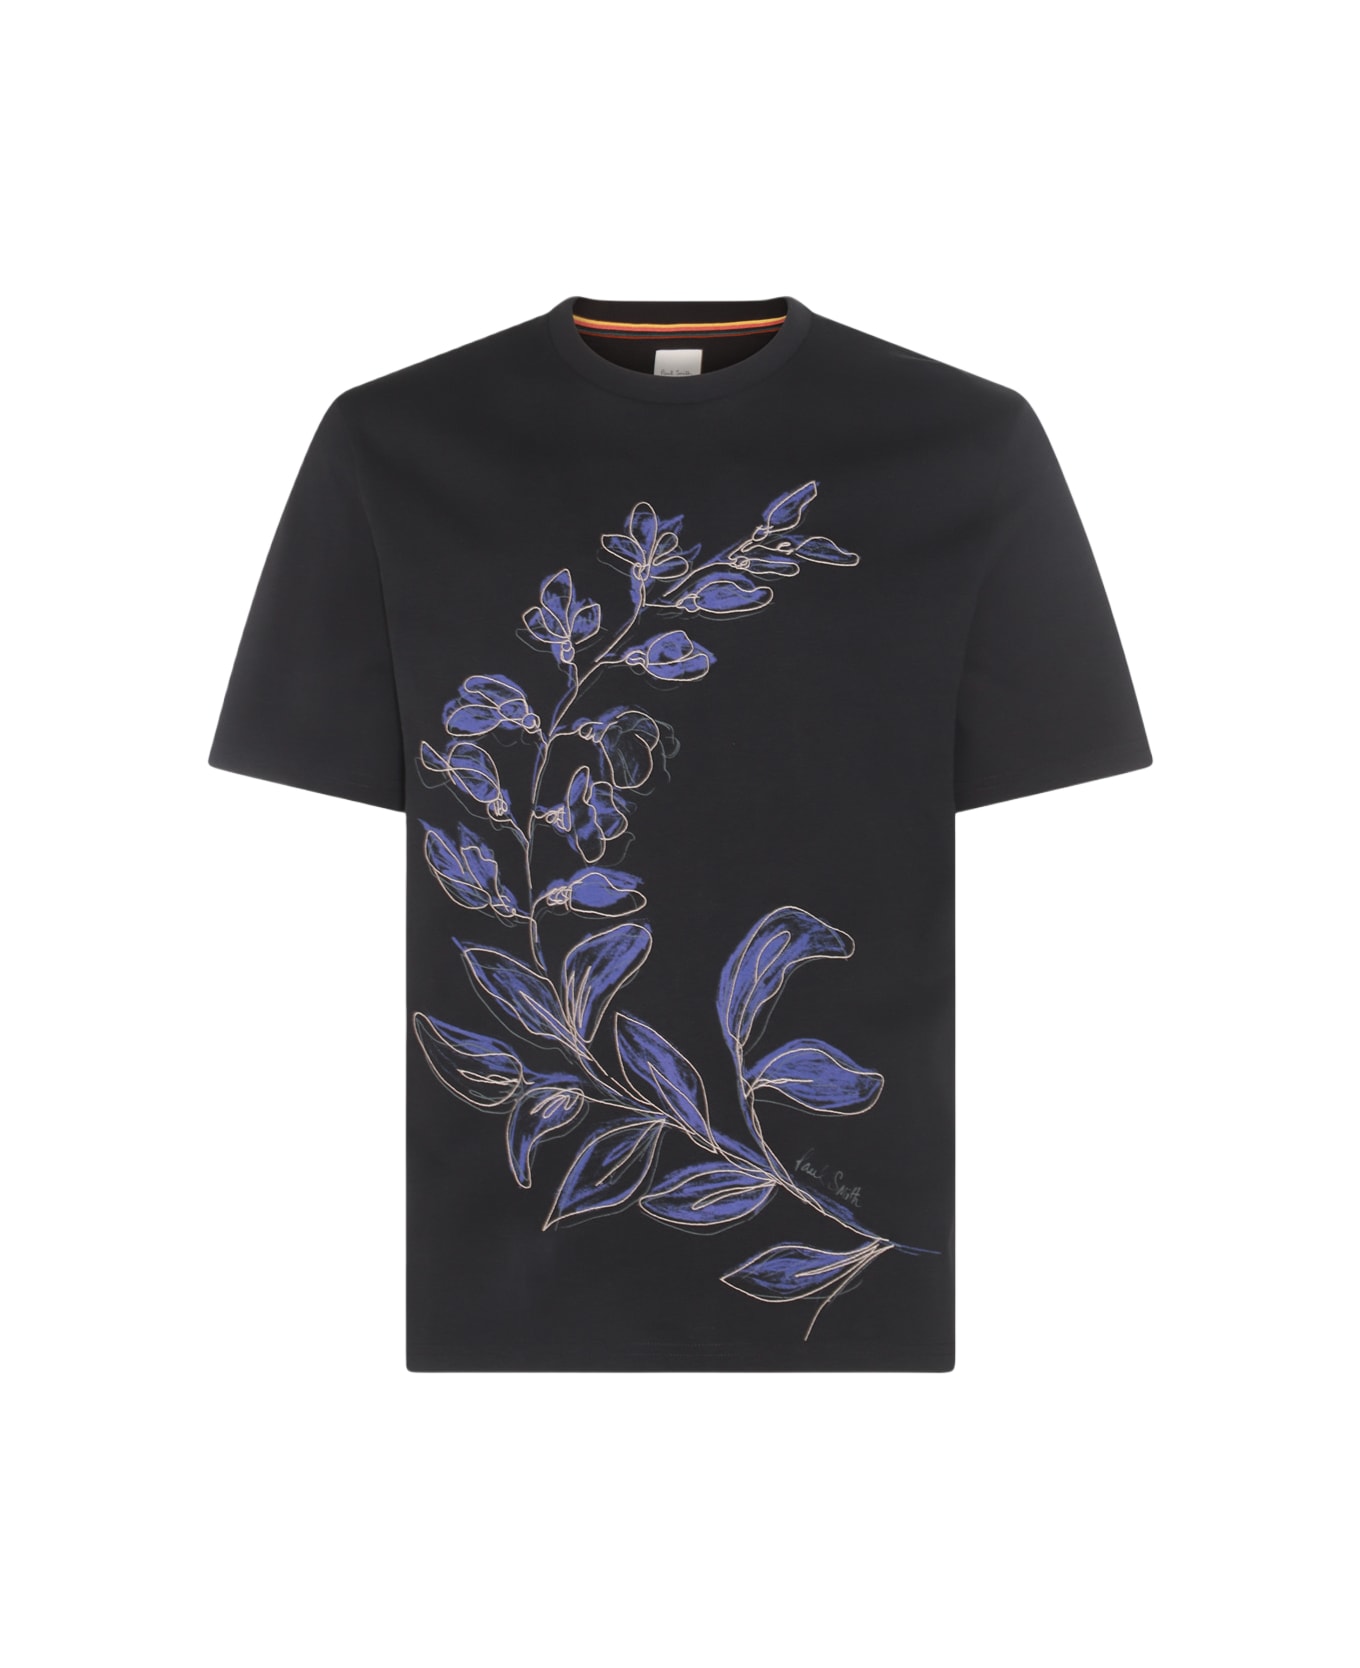 Paul Smith Navy Blue And Violet Cotton T-shirt - Blue